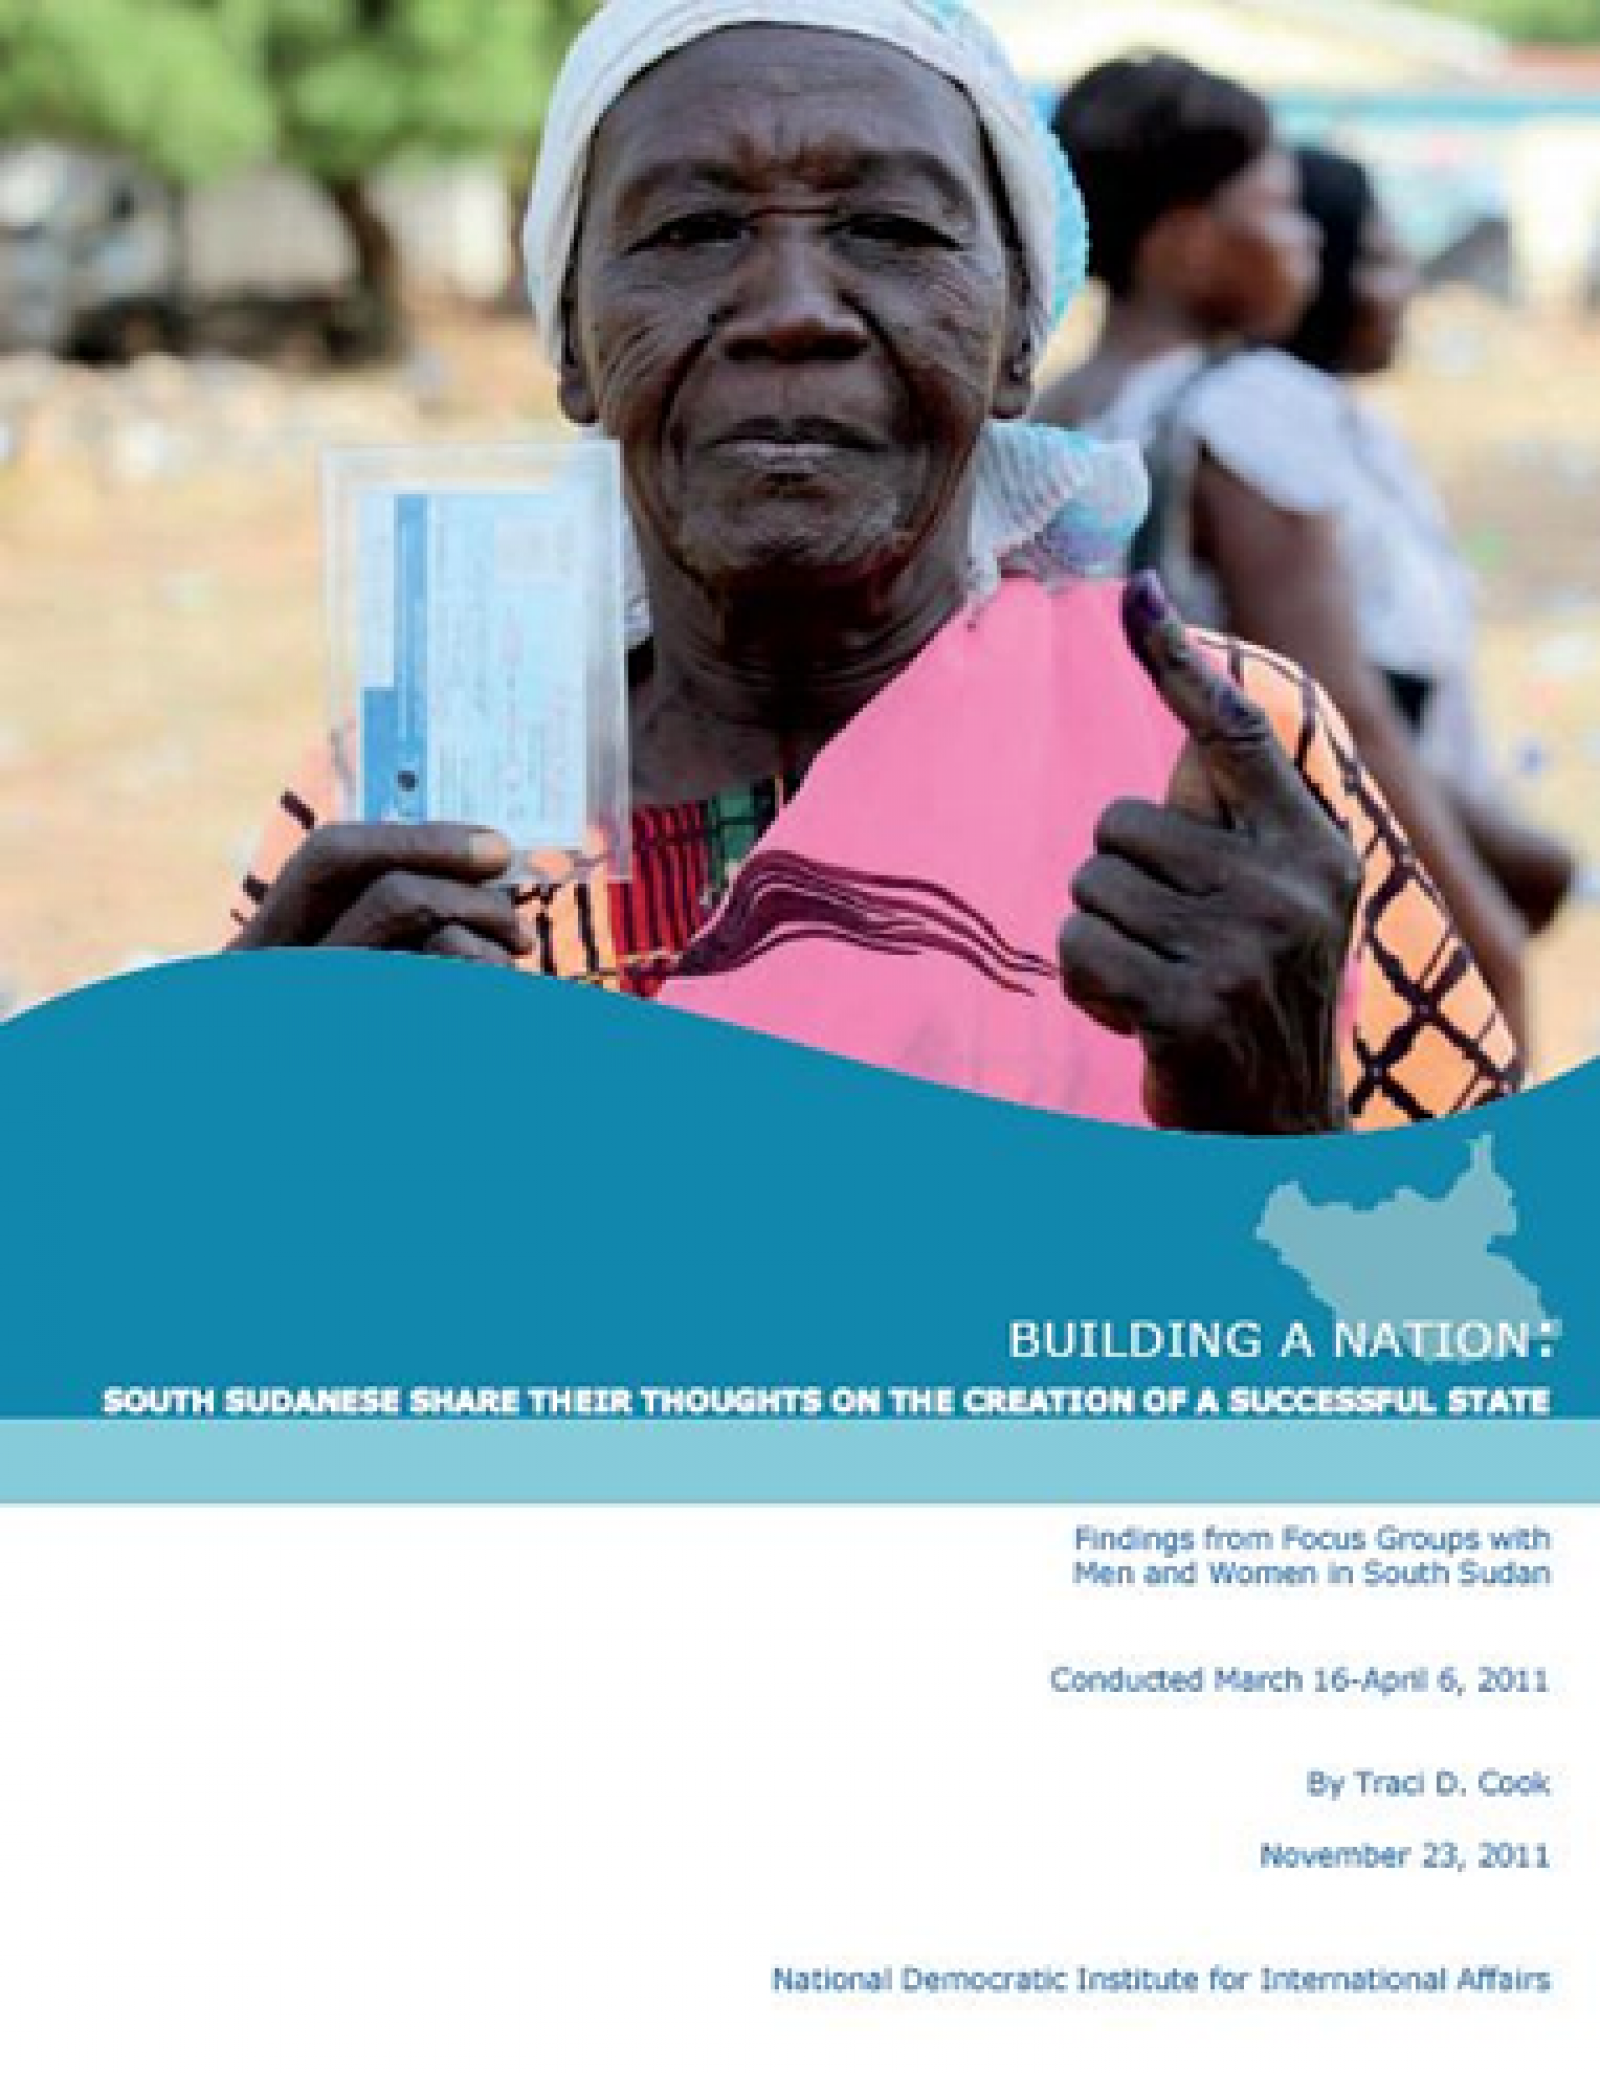 NDI Focus Group Research Documents South Sudanese Views on Building a New Nation